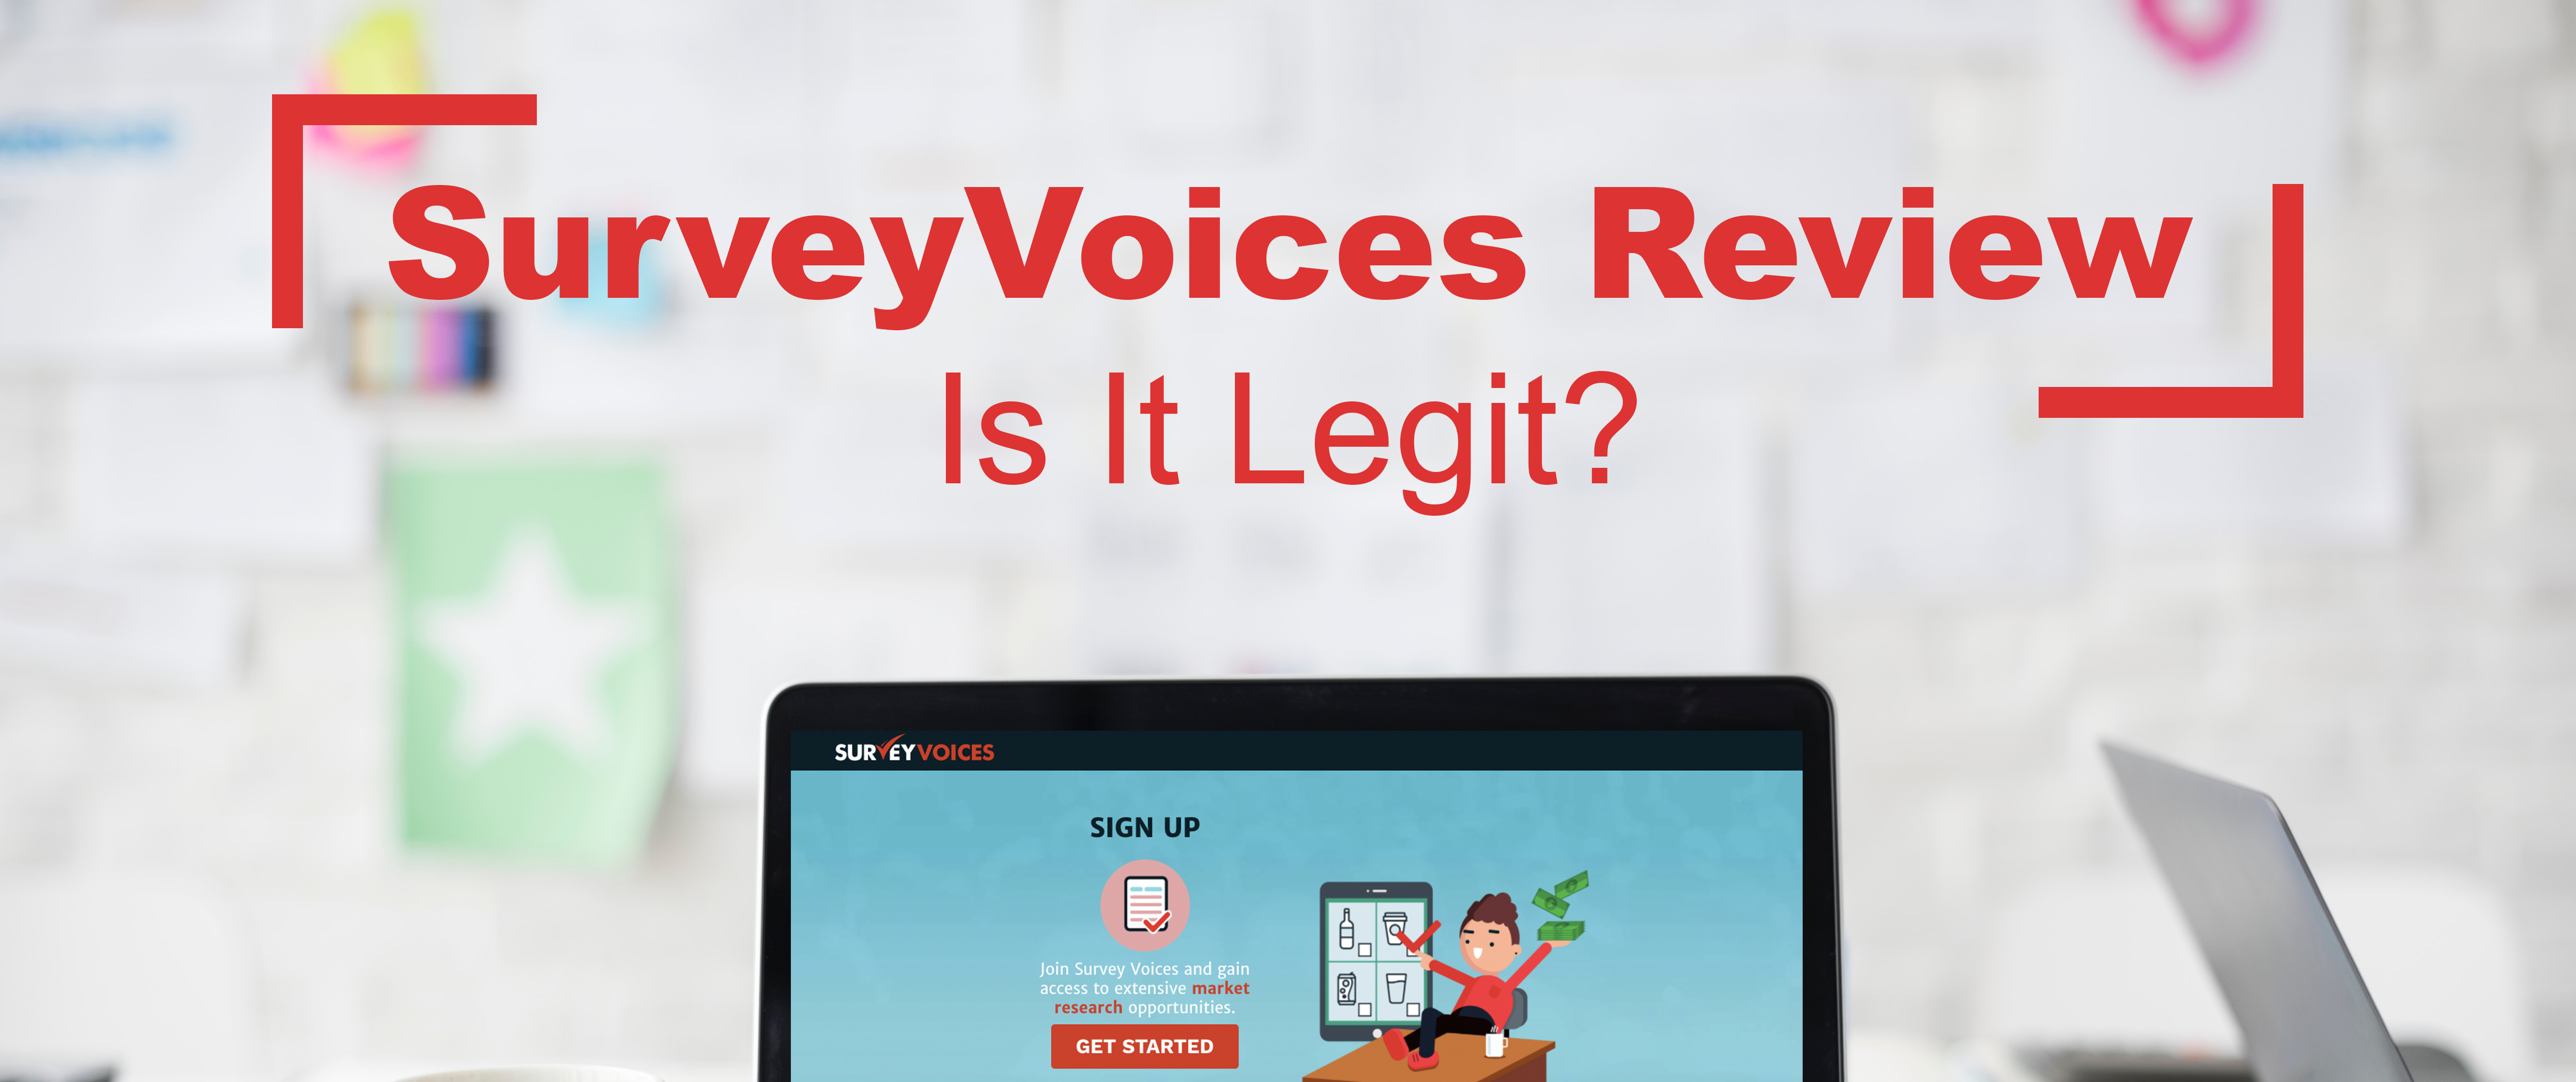 surveyvoices review